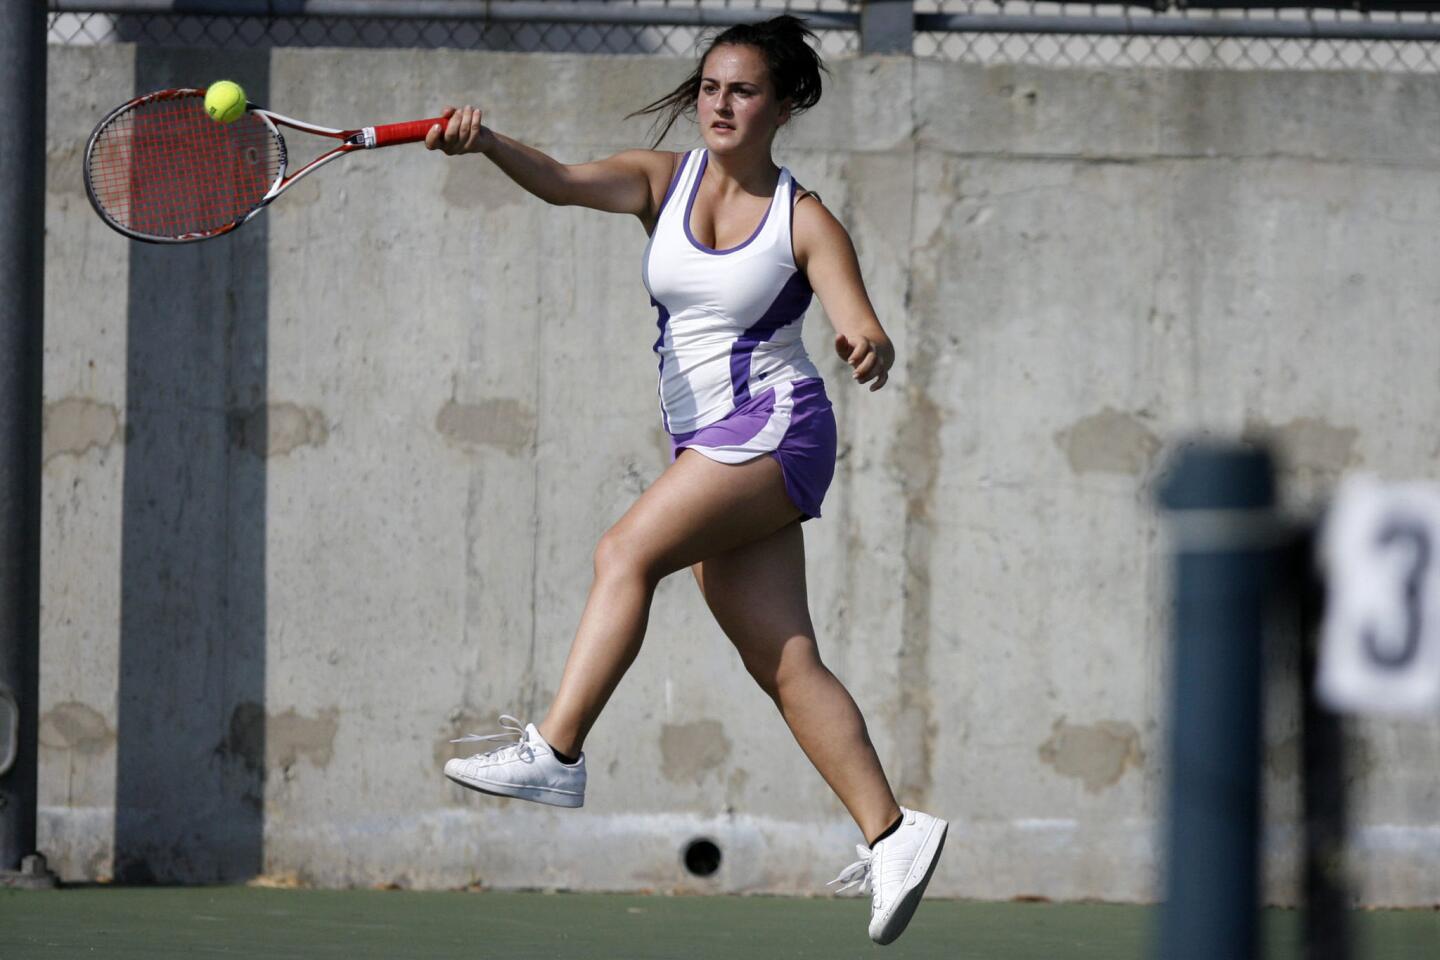 Hoover's Diana Karapetyan swings at the ball during a doubles match against Burroughs at Hoover High School in Glendale on Tuesday, September 11, 2012.